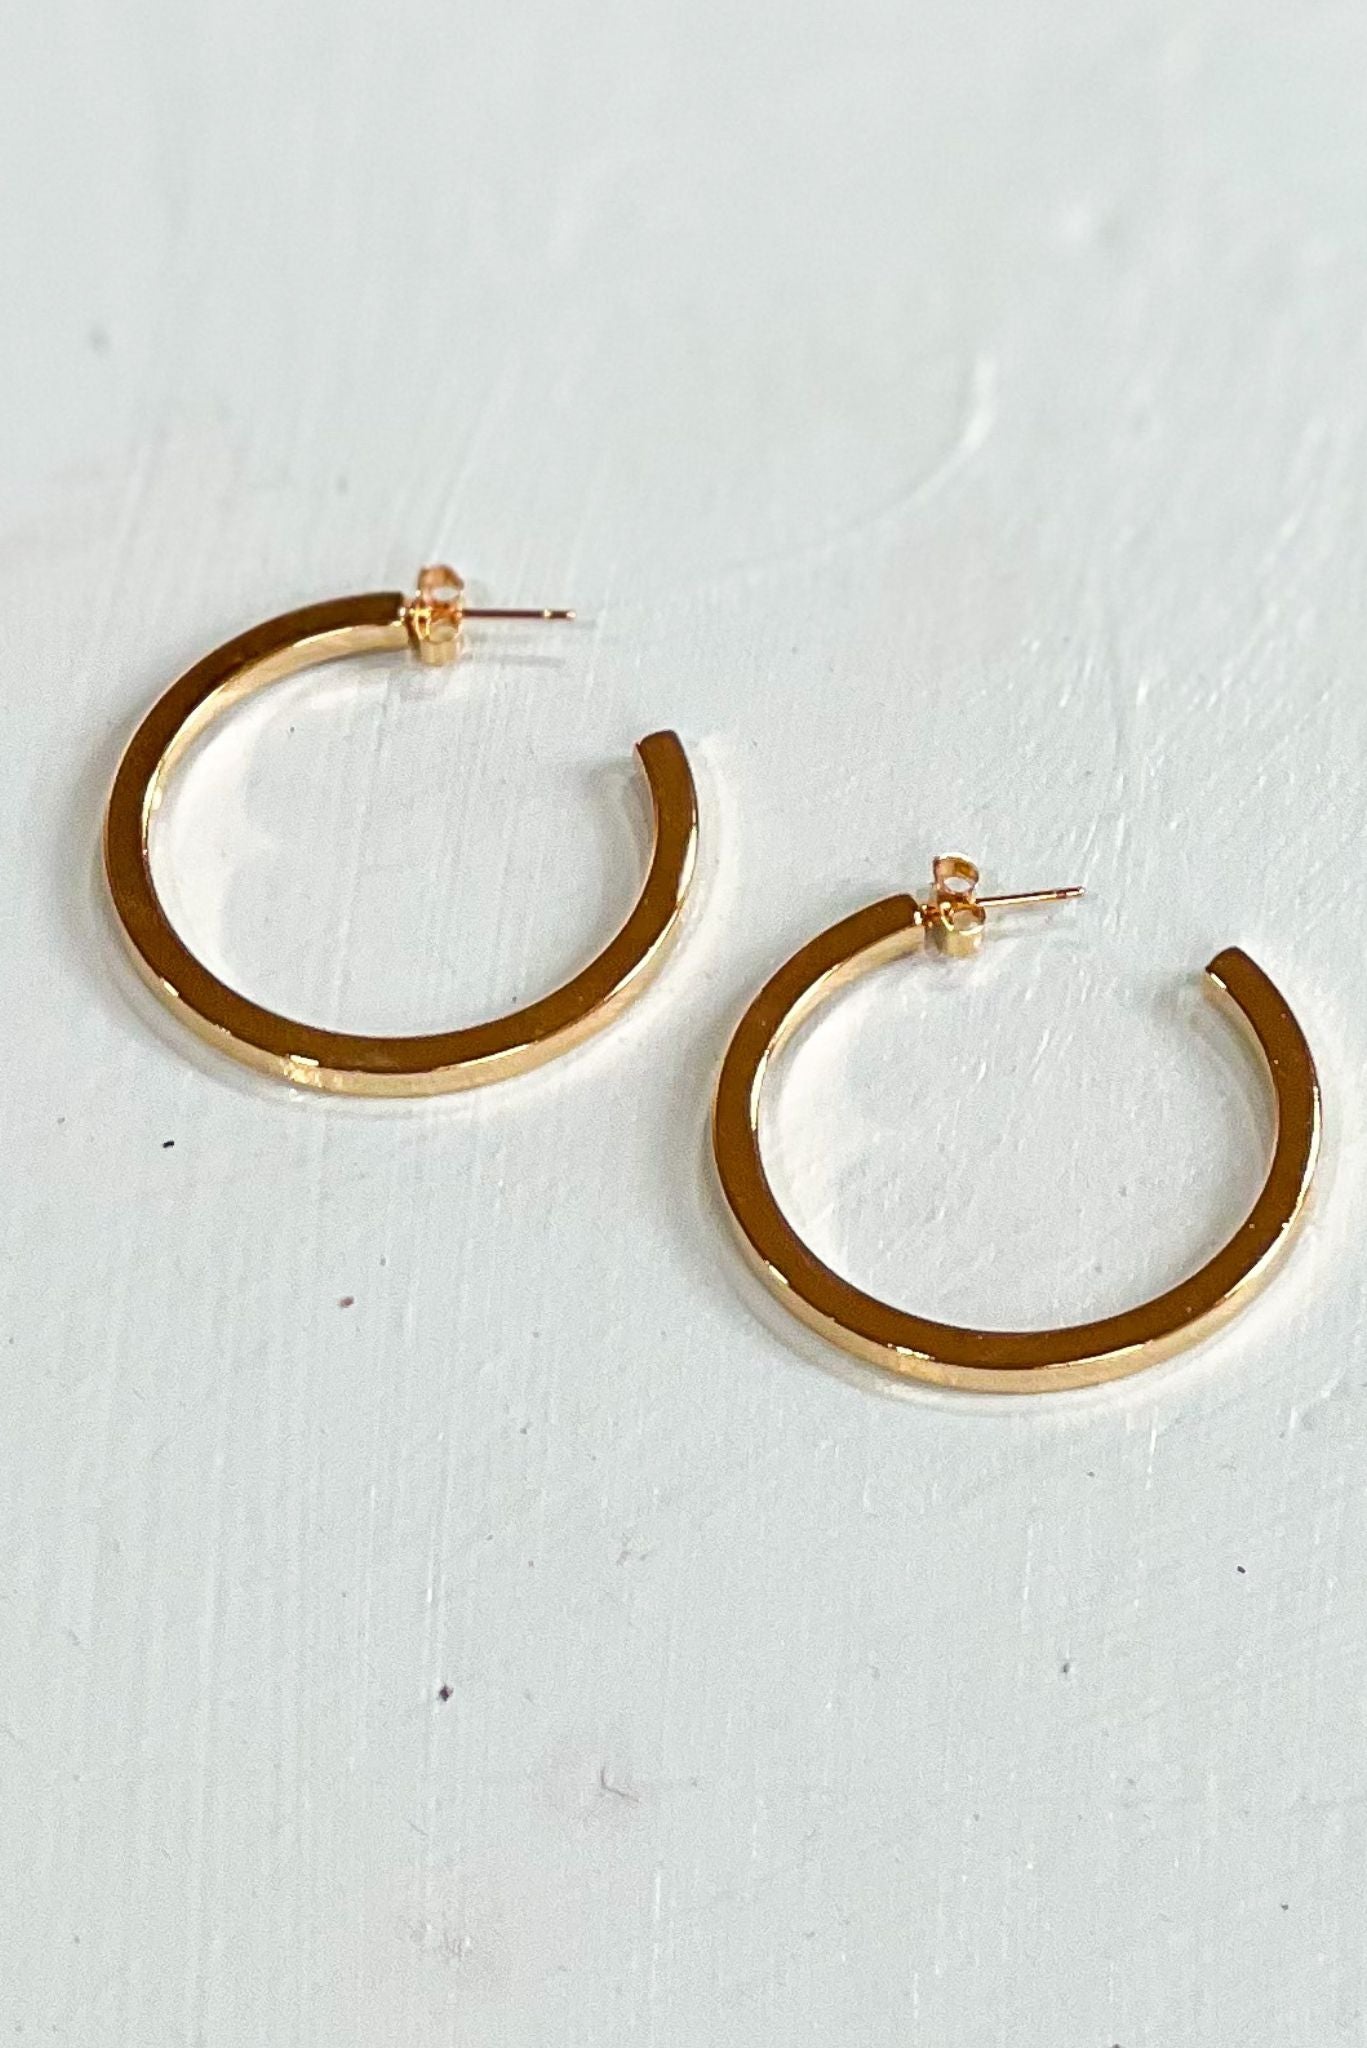 Large Gold Square Edge Open Hoop Earrings, large hoop earrings, gold hoops, everyday wear, mom style, shop style your senses by mallory fitzsimmons